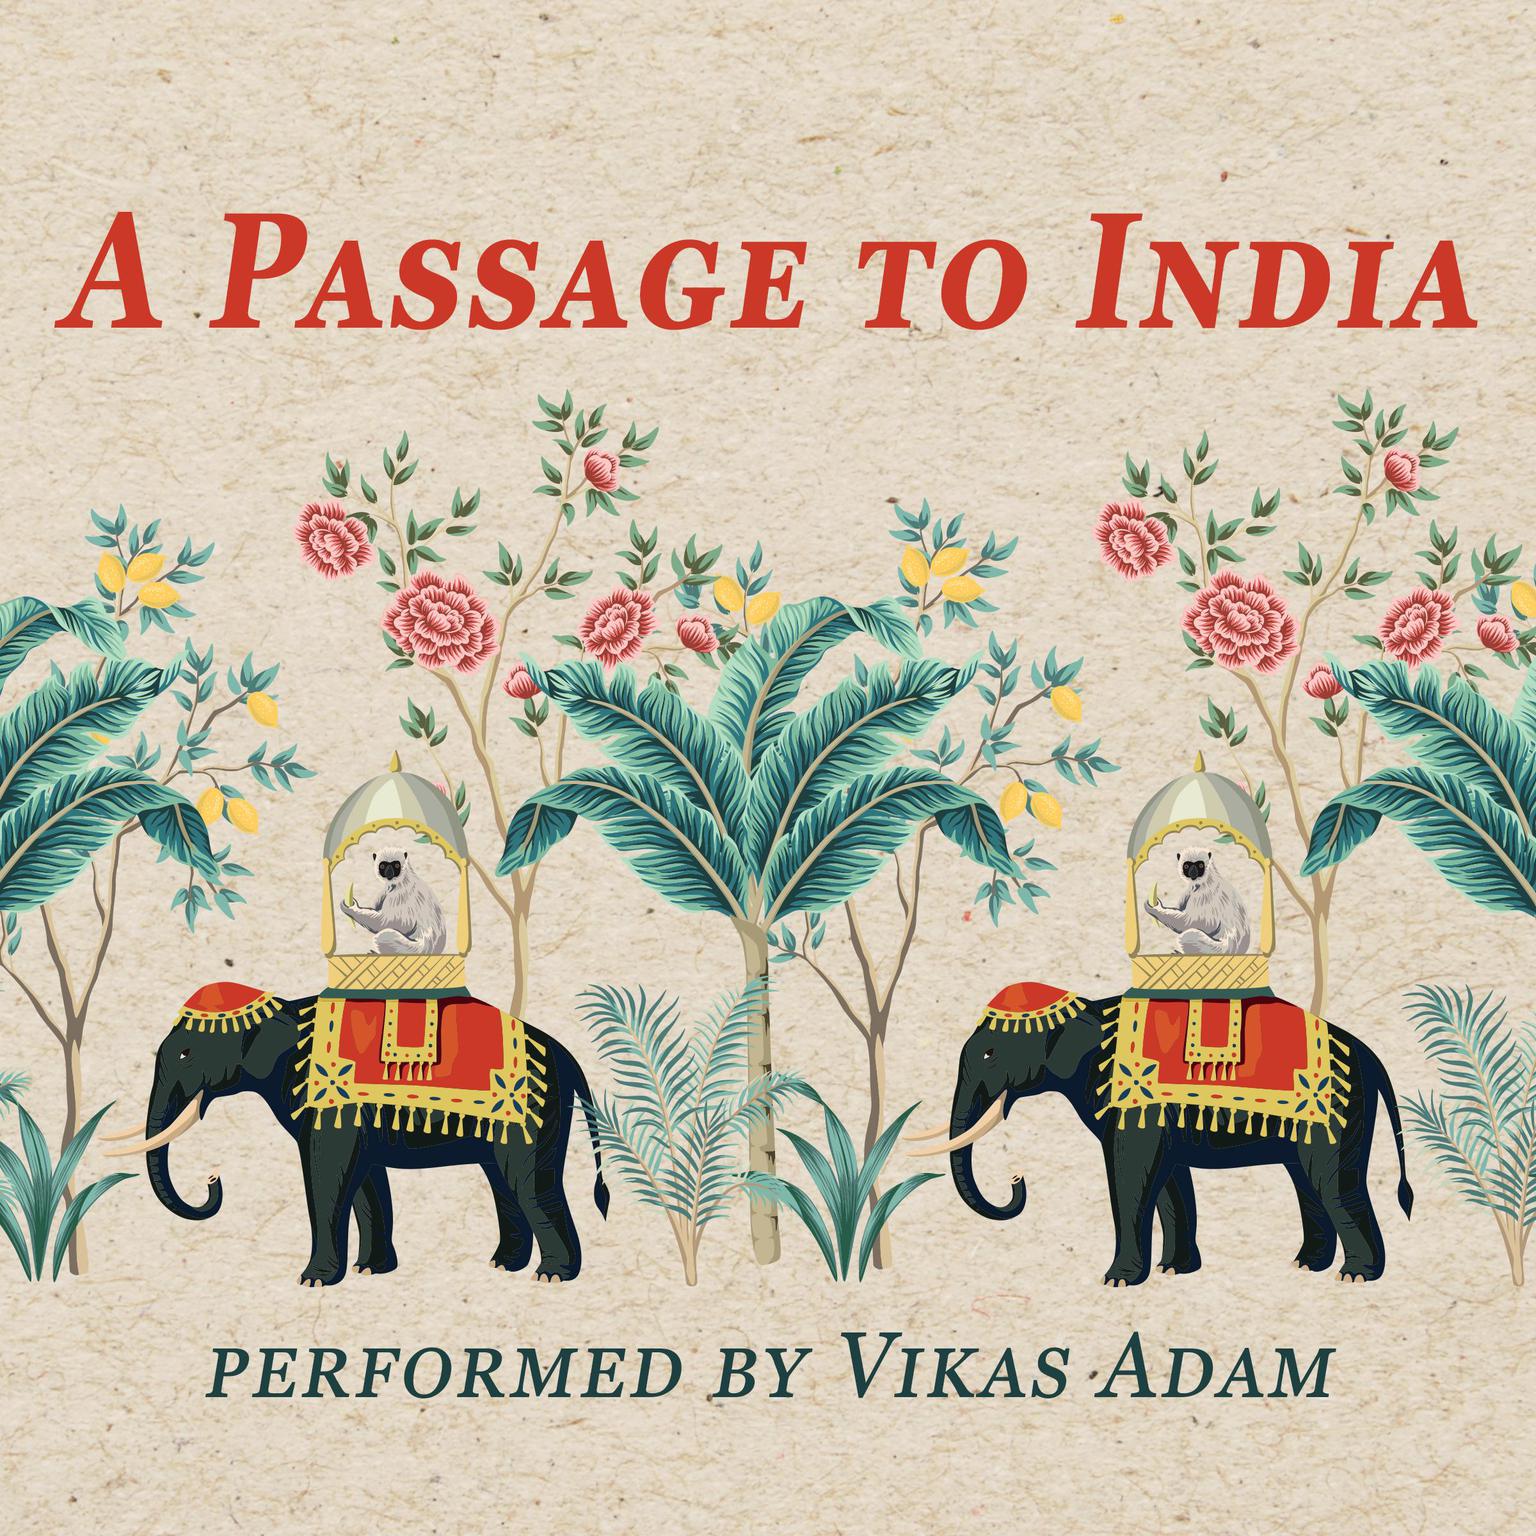 A Passage to India Audiobook, by E. M. Forster